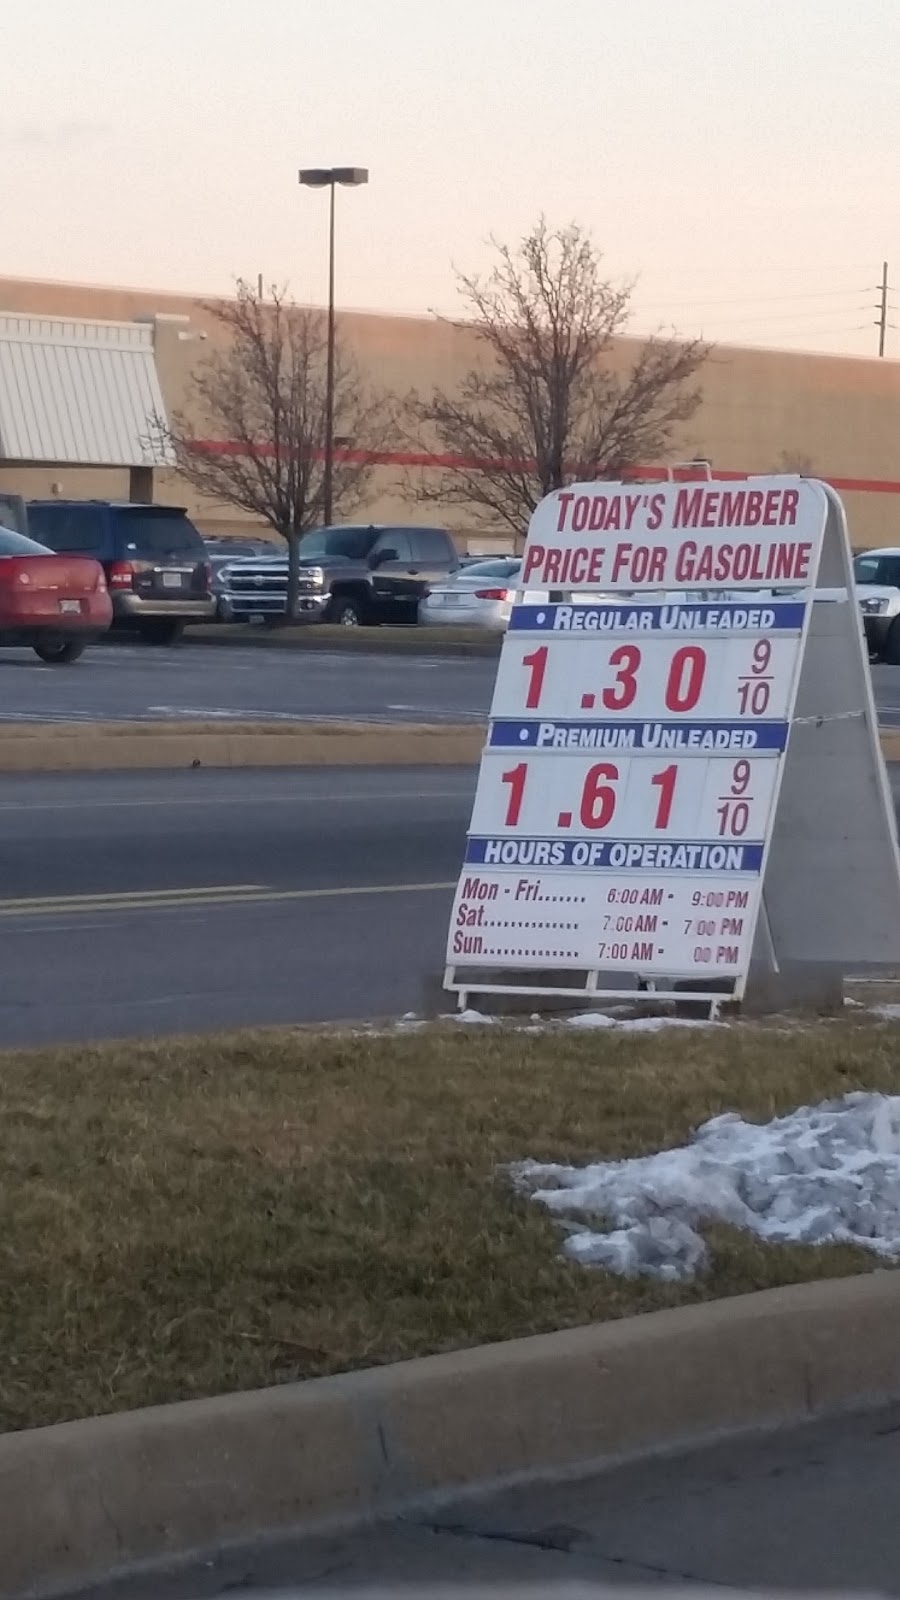 Costco Gas Station | 200 Costco Way, St Peters, MO 63376, USA | Phone: (636) 397-6805